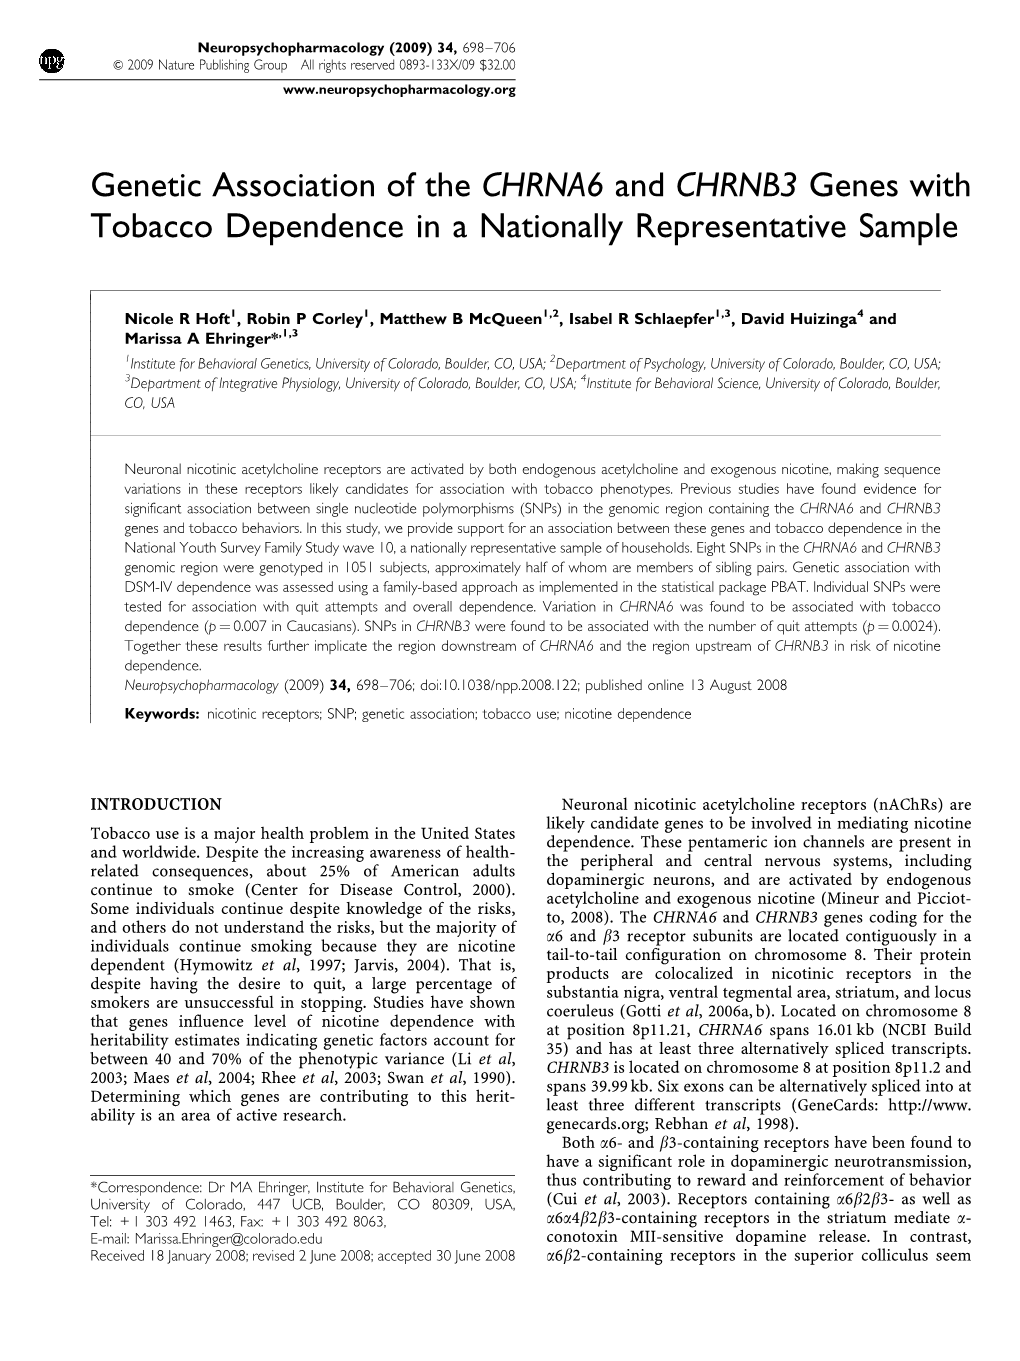 Genetic Association of the CHRNA6 and CHRNB3 Genes with Tobacco Dependence in a Nationally Representative Sample